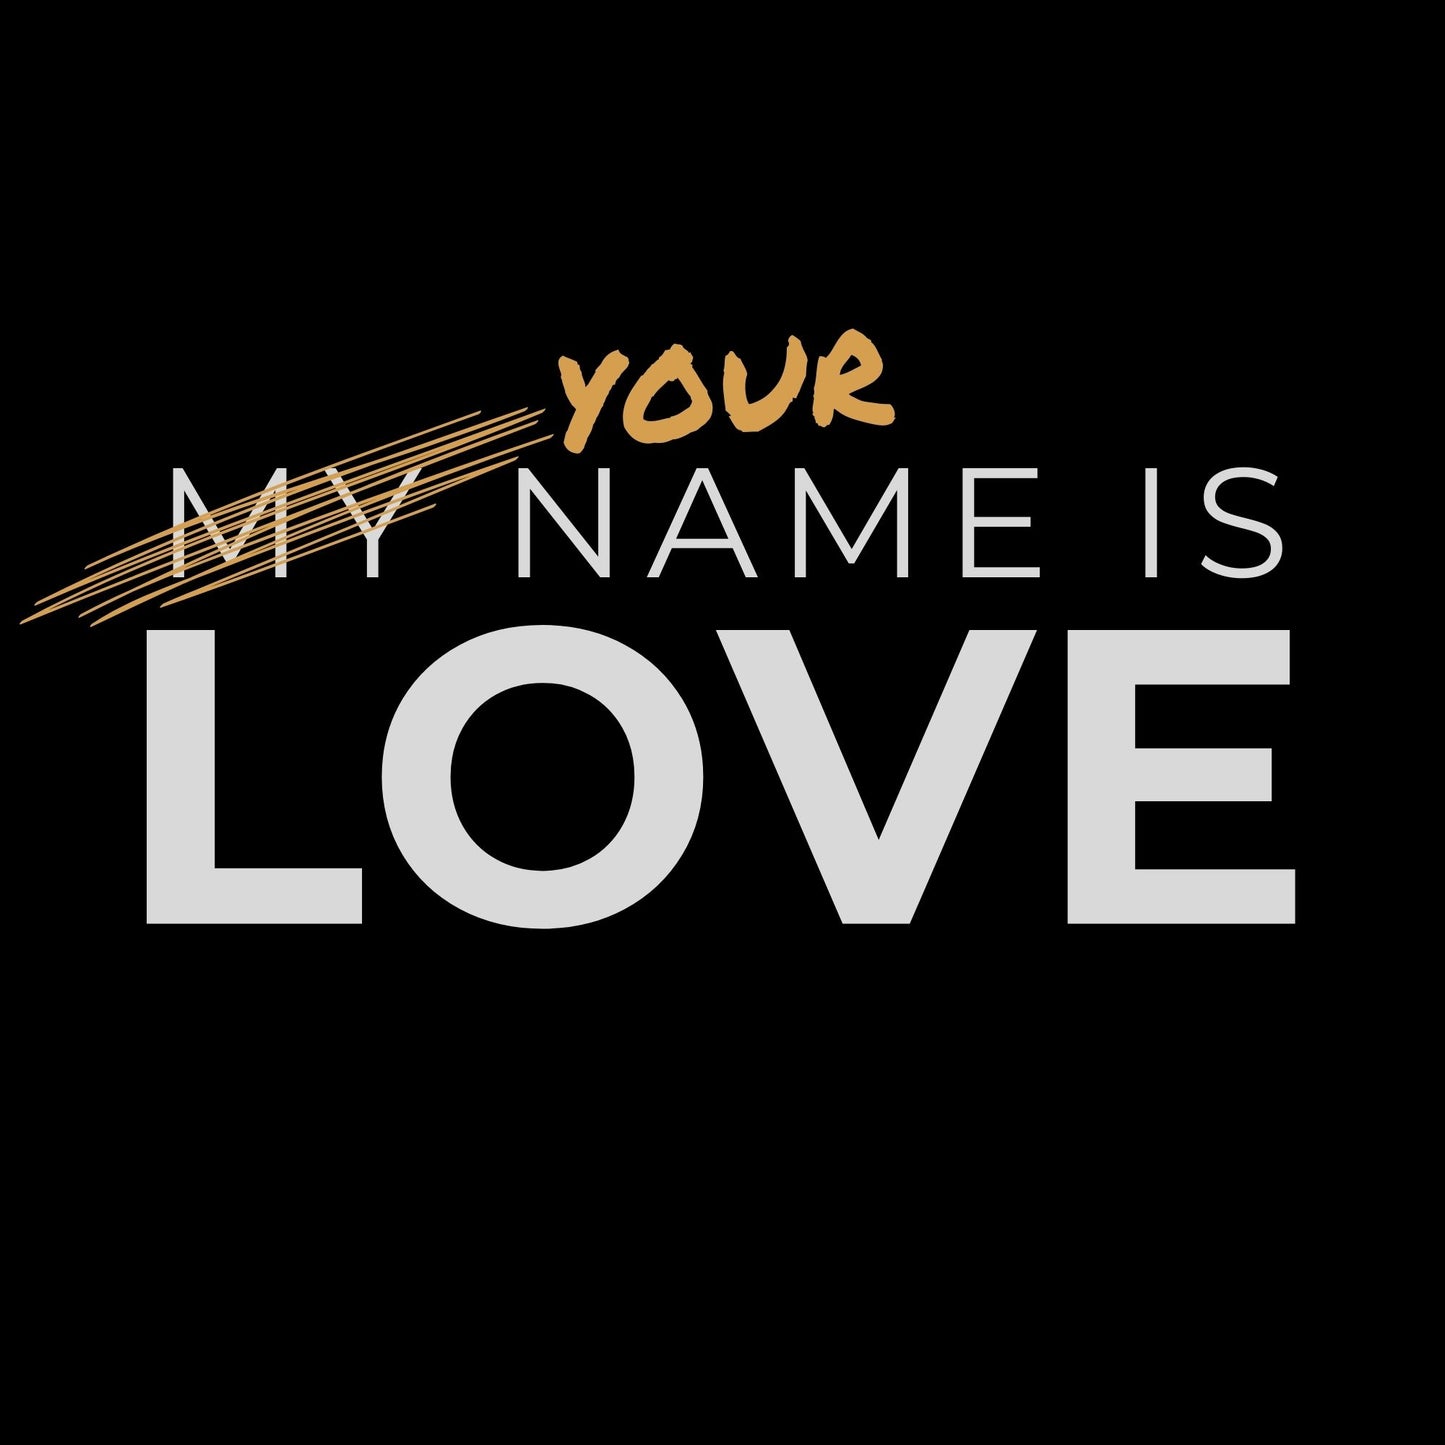 Your Name Is Love: Men's classic tee